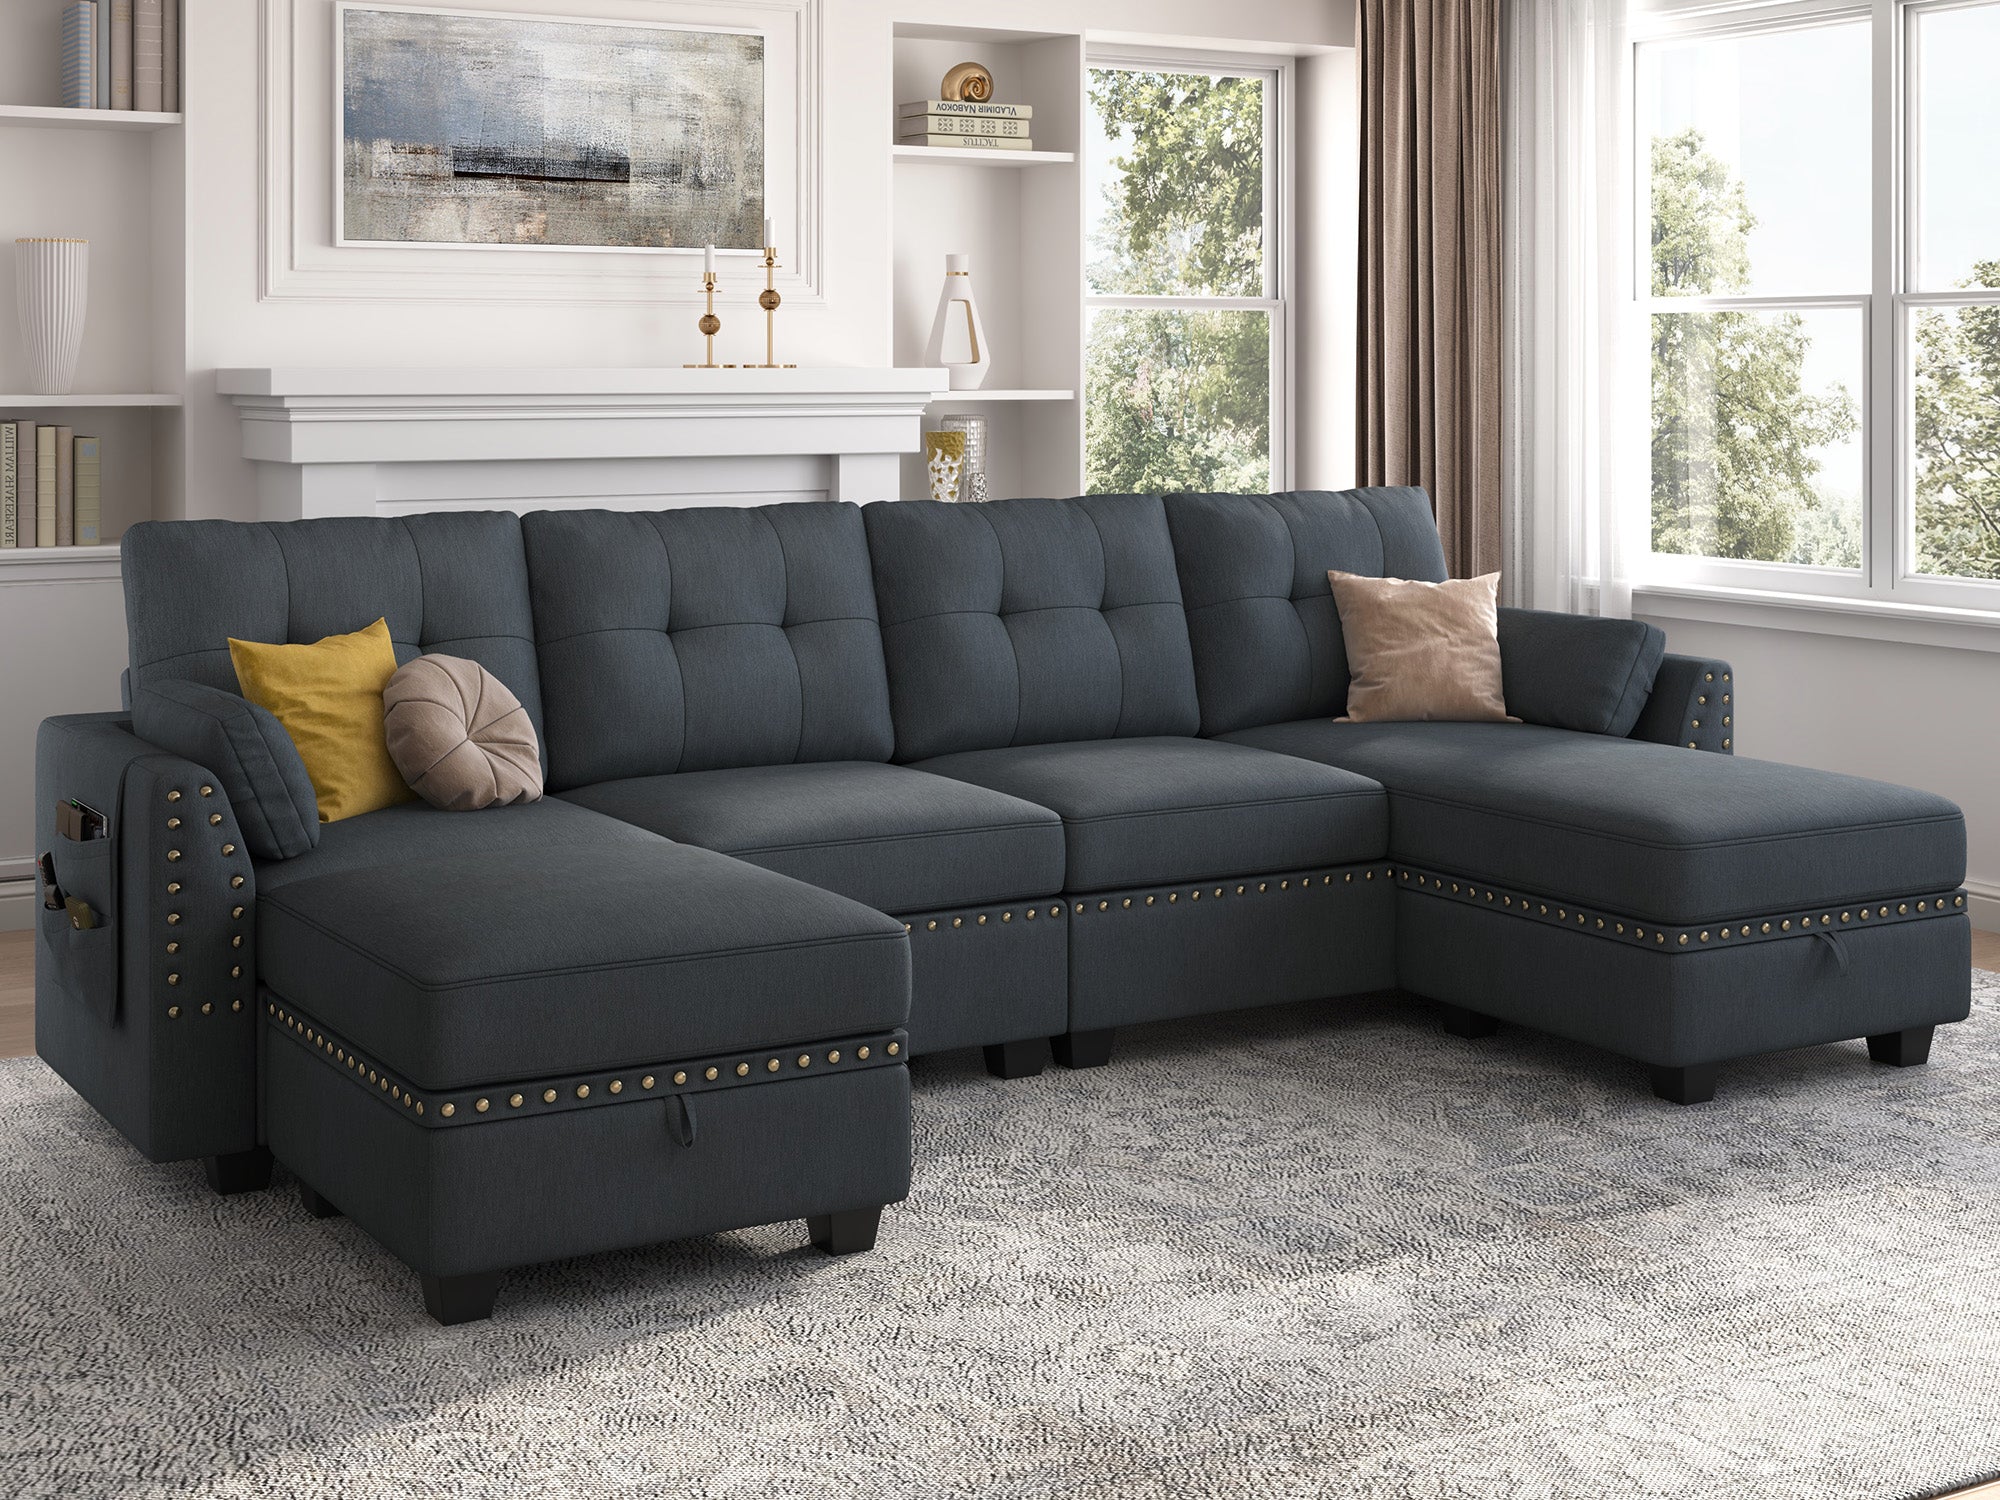 HONBAY 4-Seat U-Shaped Sectional Sofa with Storage Reversible Chaise Set